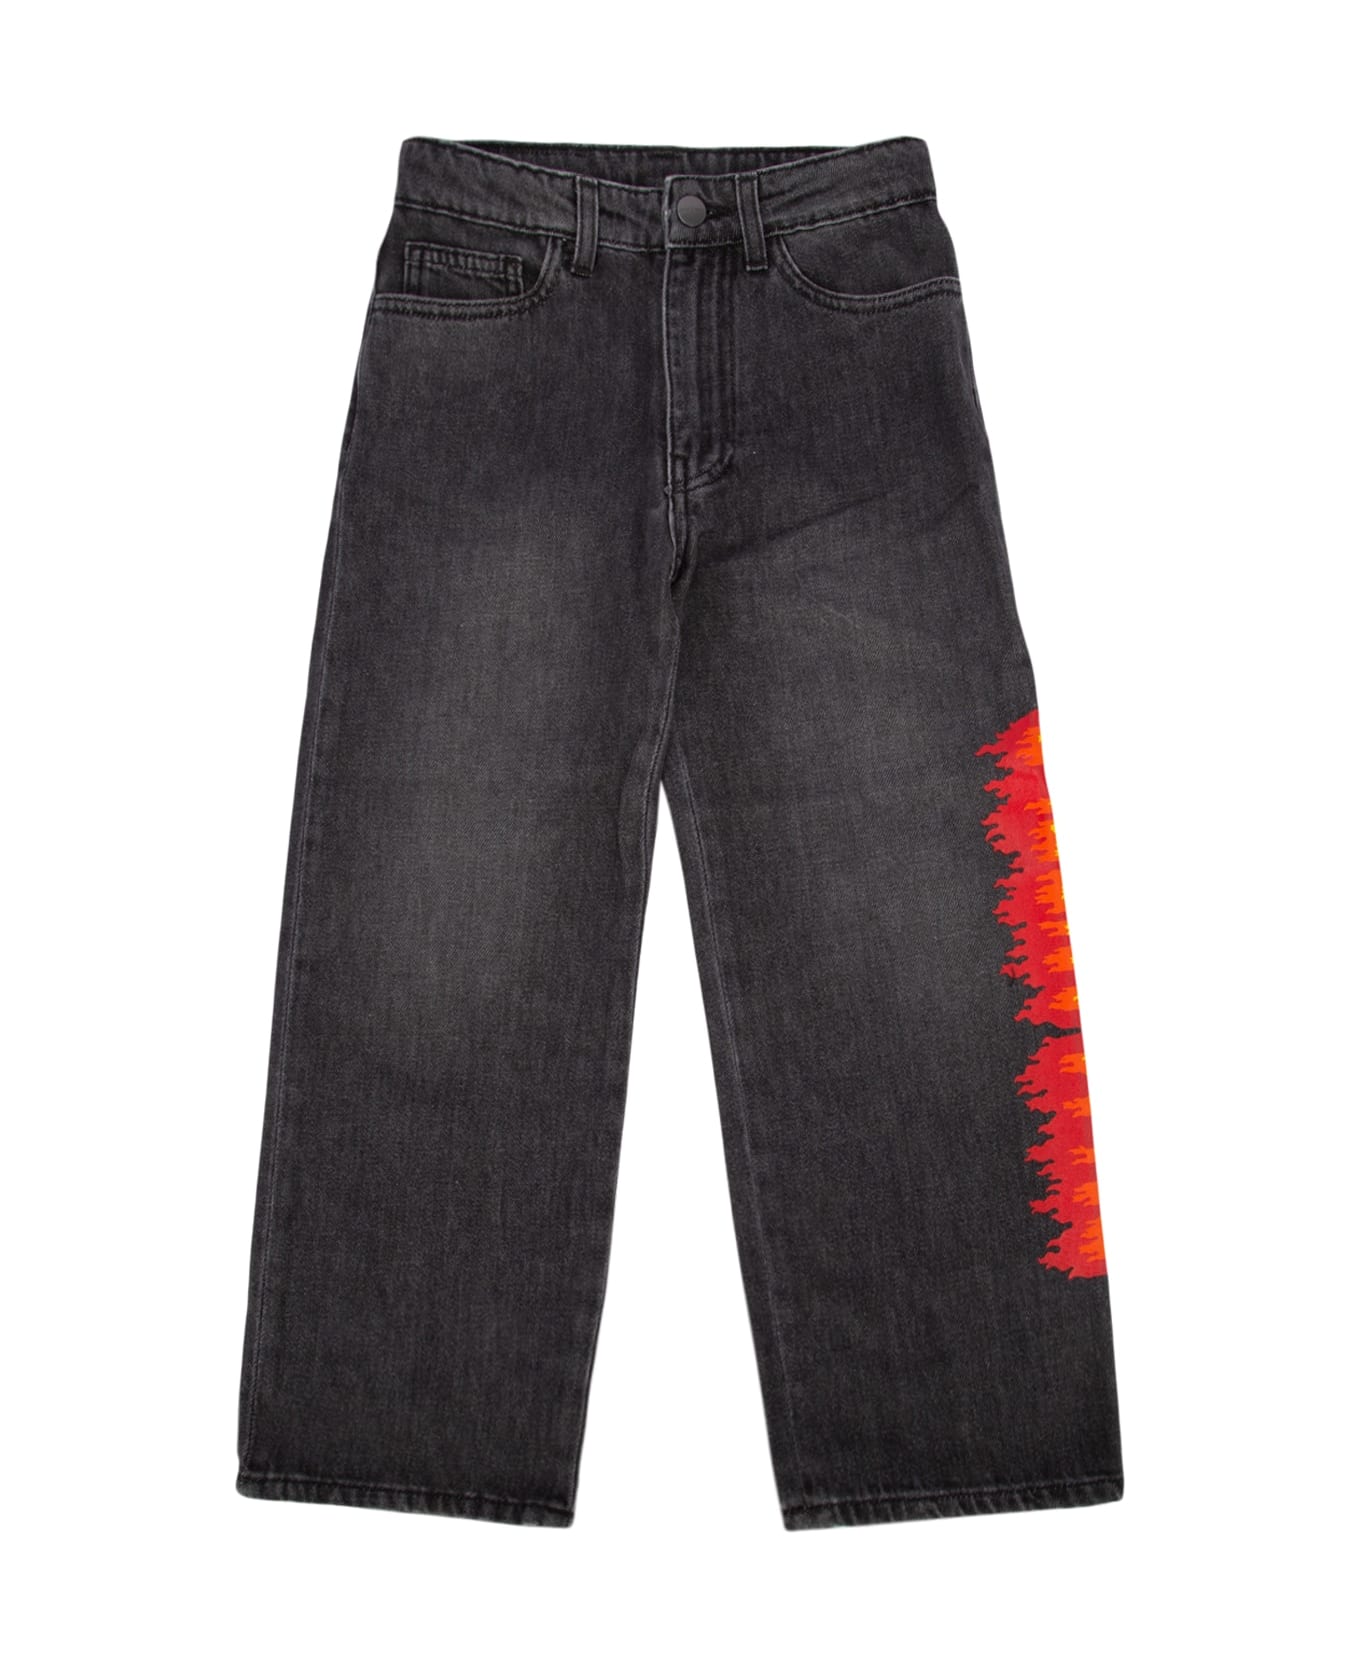 Palm Angels Jeans - BLACKRED ボトムス